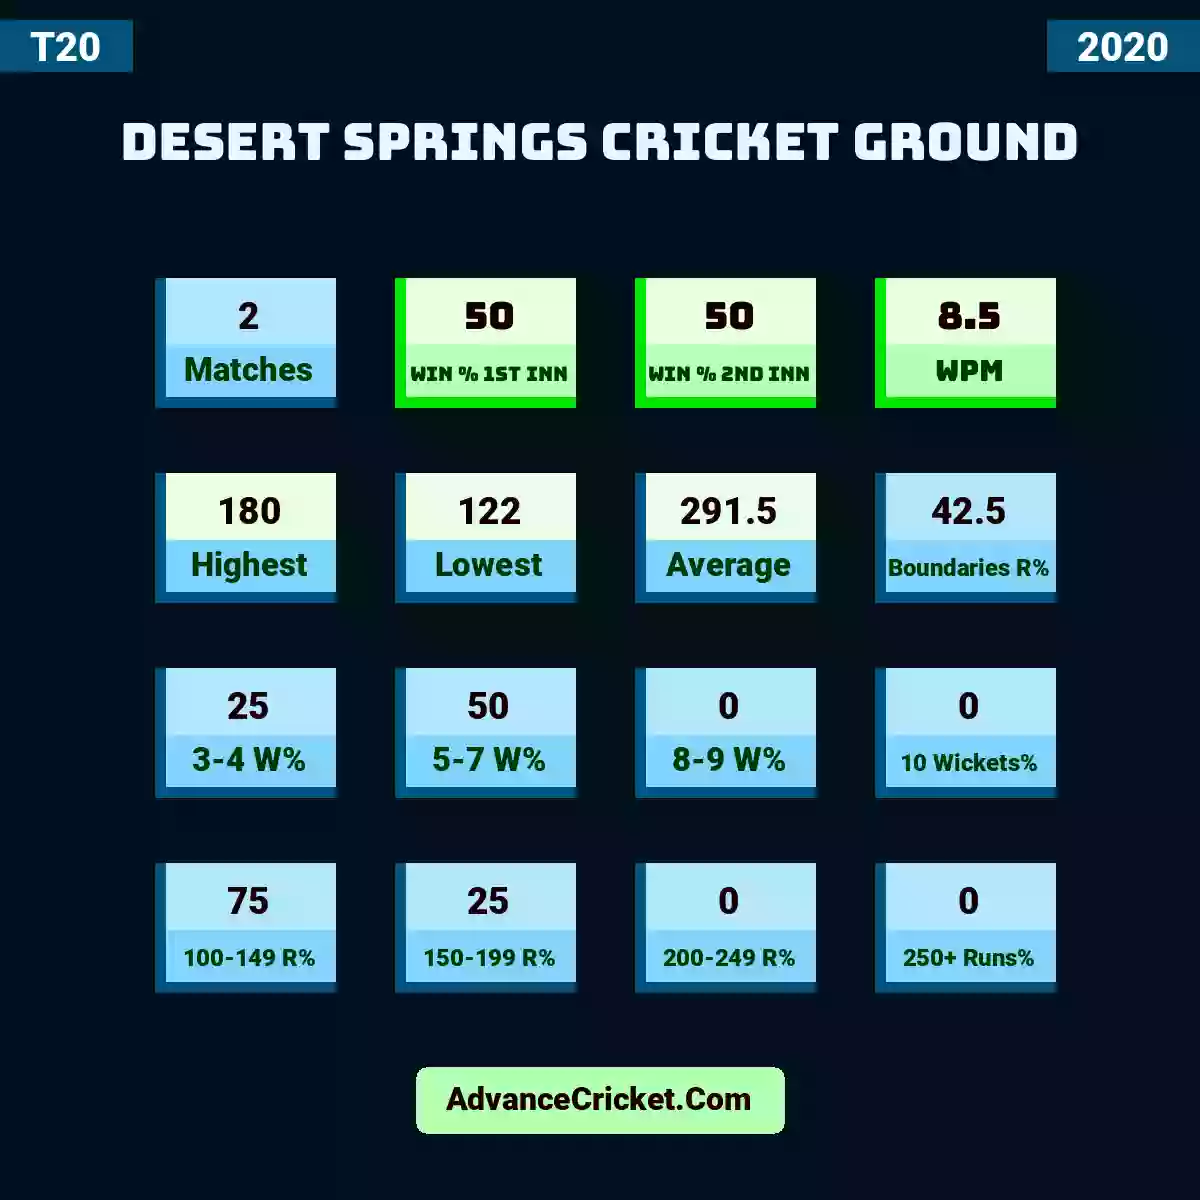 Image showing Desert Springs Cricket Ground with Matches: 2, Win % 1st Inn: 50, Win % 2nd Inn: 50, WPM: 8.5, Highest: 180, Lowest: 122, Average: 291.5, Boundaries R%: 42.5, 3-4 W%: 25, 5-7 W%: 50, 8-9 W%: 0, 10 Wickets%: 0, 100-149 R%: 75, 150-199 R%: 25, 200-249 R%: 0, 250+ Runs%: 0.